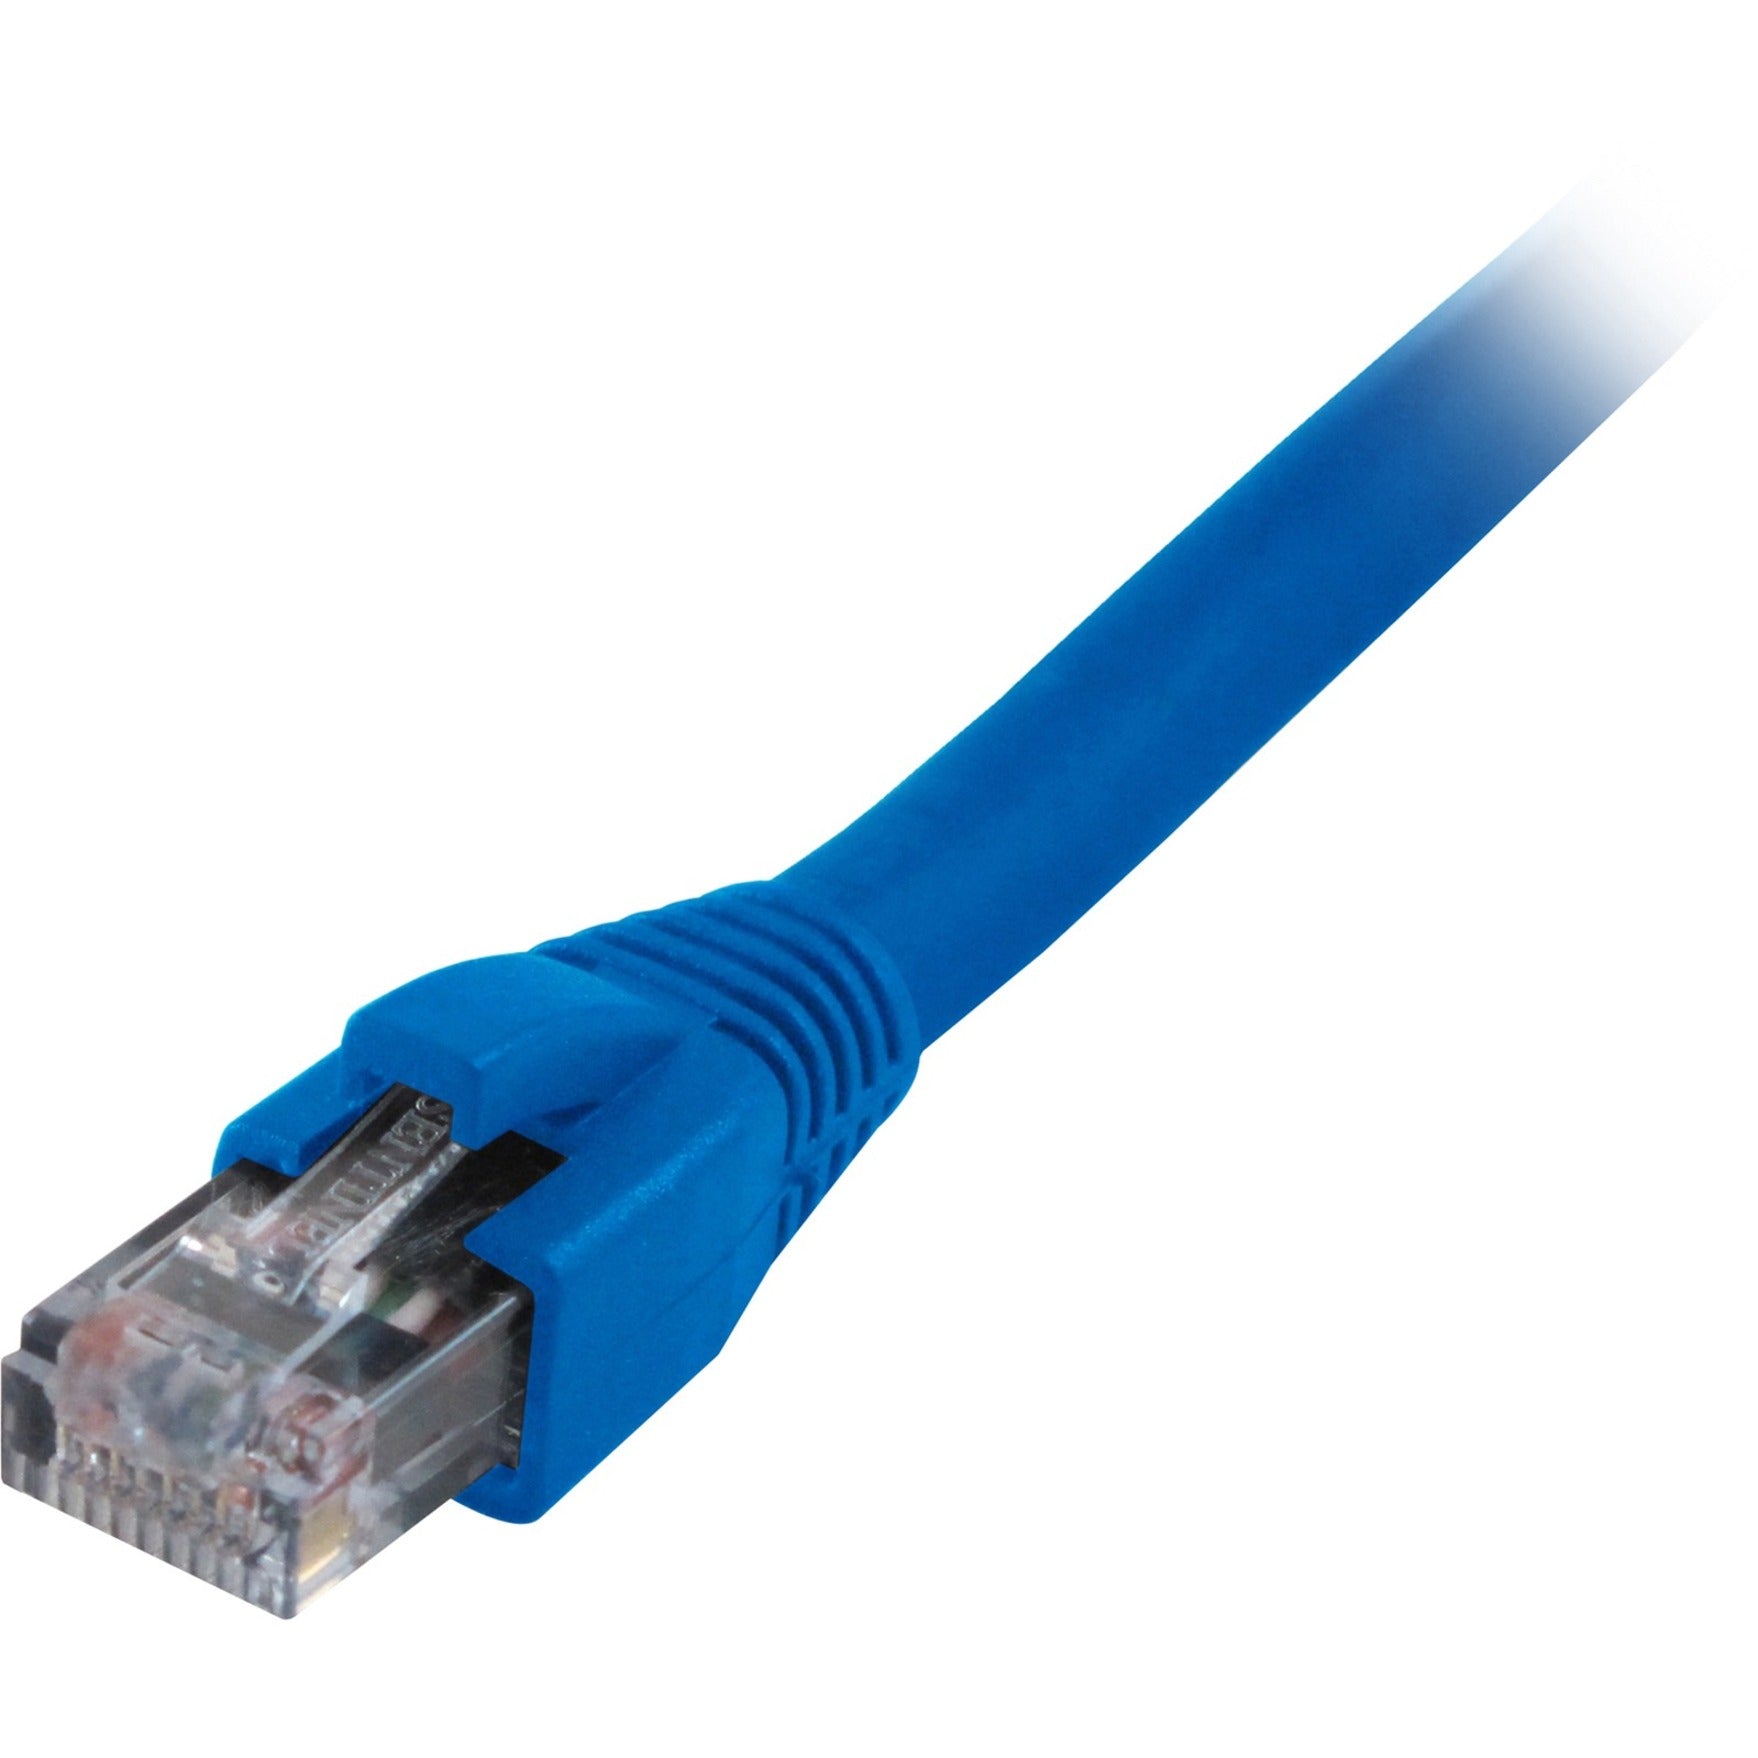 Comprehensive CAT6SHP-50BLU Cat6 Snagless Solid Plenum Shielded Blue Patch Cable 50ft, 1 Gbit/s Data Transfer Rate, Lifetime Warranty